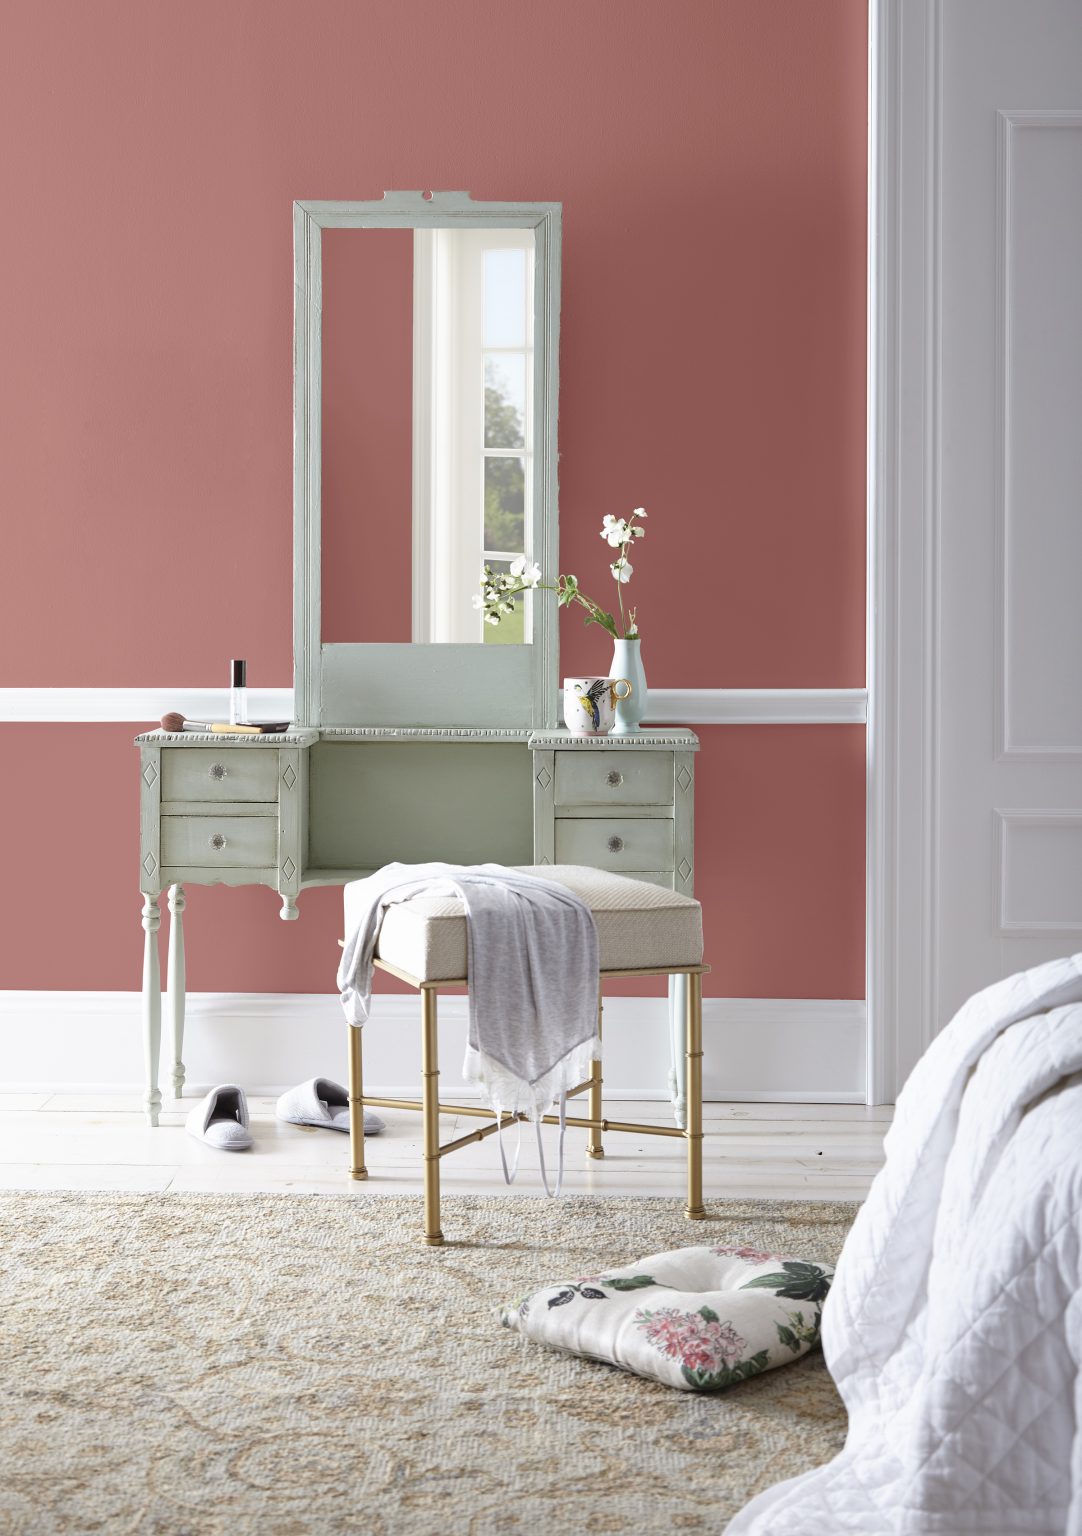 A powder room with walls in the colour Vermilion and styled with a vintage vanity